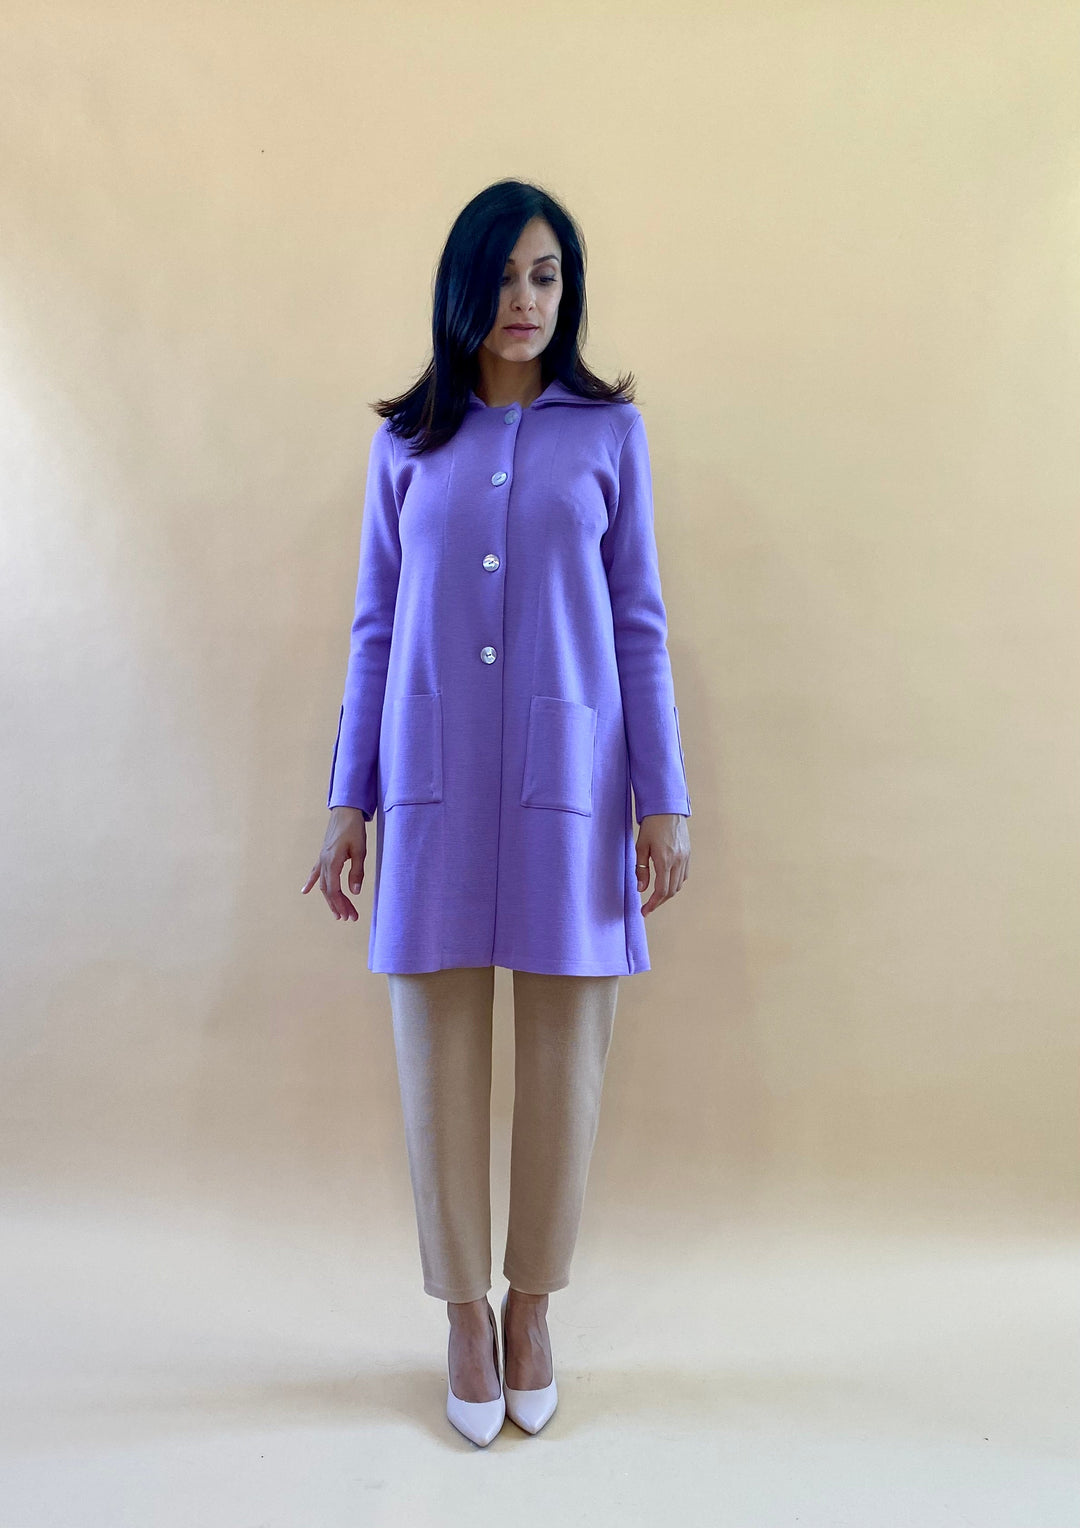 Woman wearing a purple coat and beige pants against a neutral background